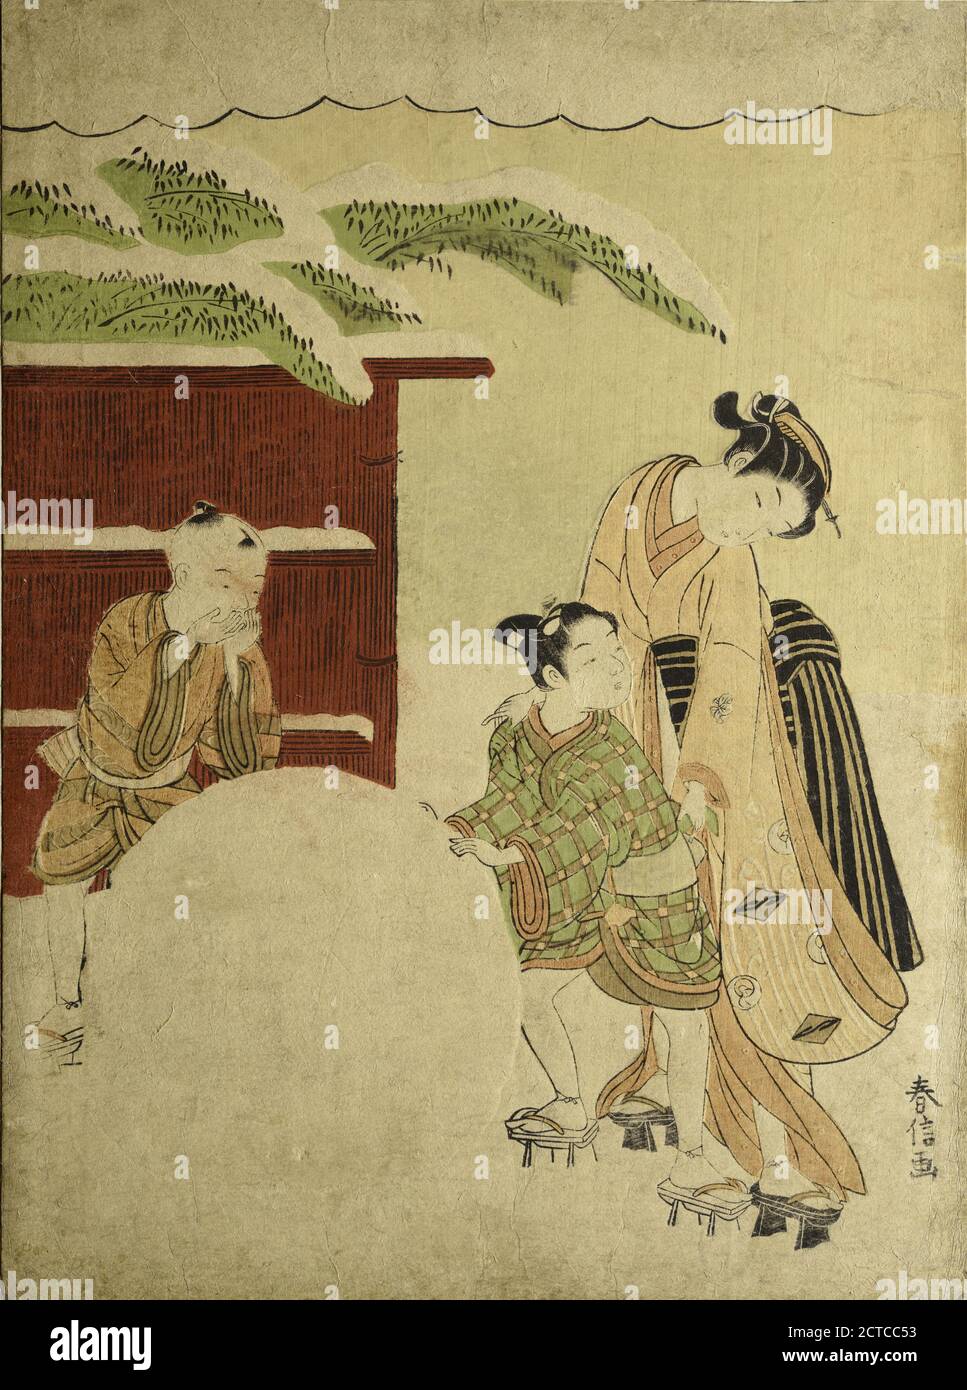 Two boys rolling a large snowball.  A woman standing behind one of them adjusting his clothing.  In the background a straw fence  and snow-laden bamboo branches, still image, Prints, 1766 Stock Photo